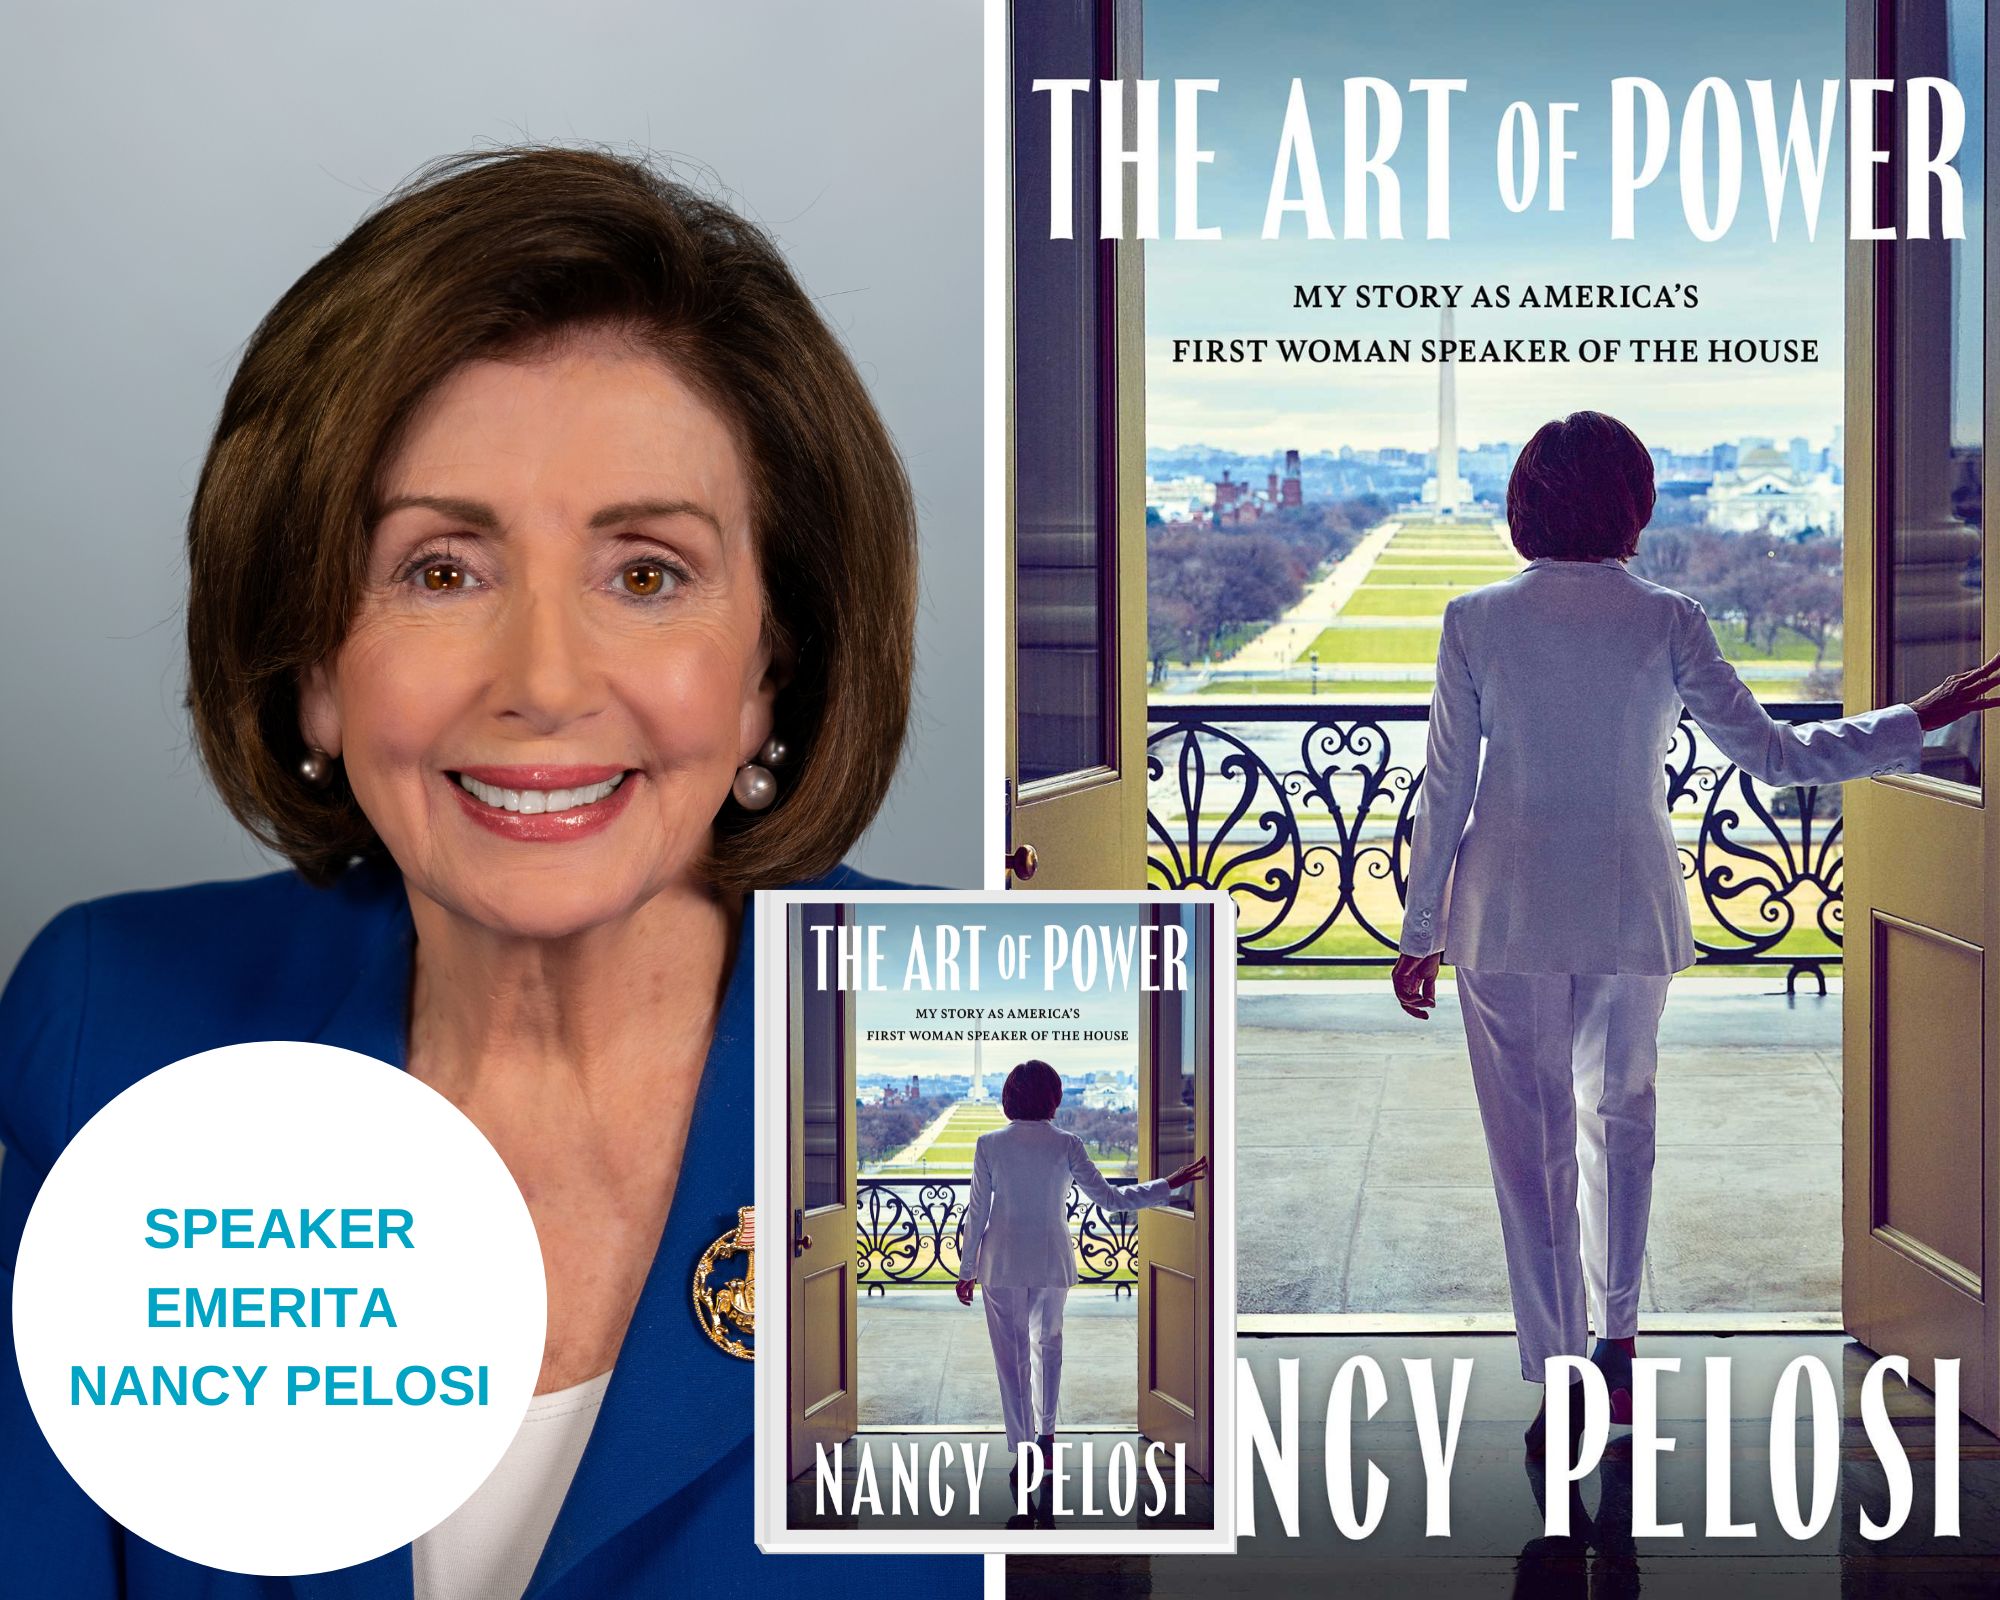 A photo collage of Nancy Pelosi on the left and the book cover of her book, The Art of Power, on the right. The book cover is a photograph of Pelosi standing in front of open doors overlooking Washington DC. There is a white circle on the bottom left that has the text: Speaker Emerita Nancy Pelosi